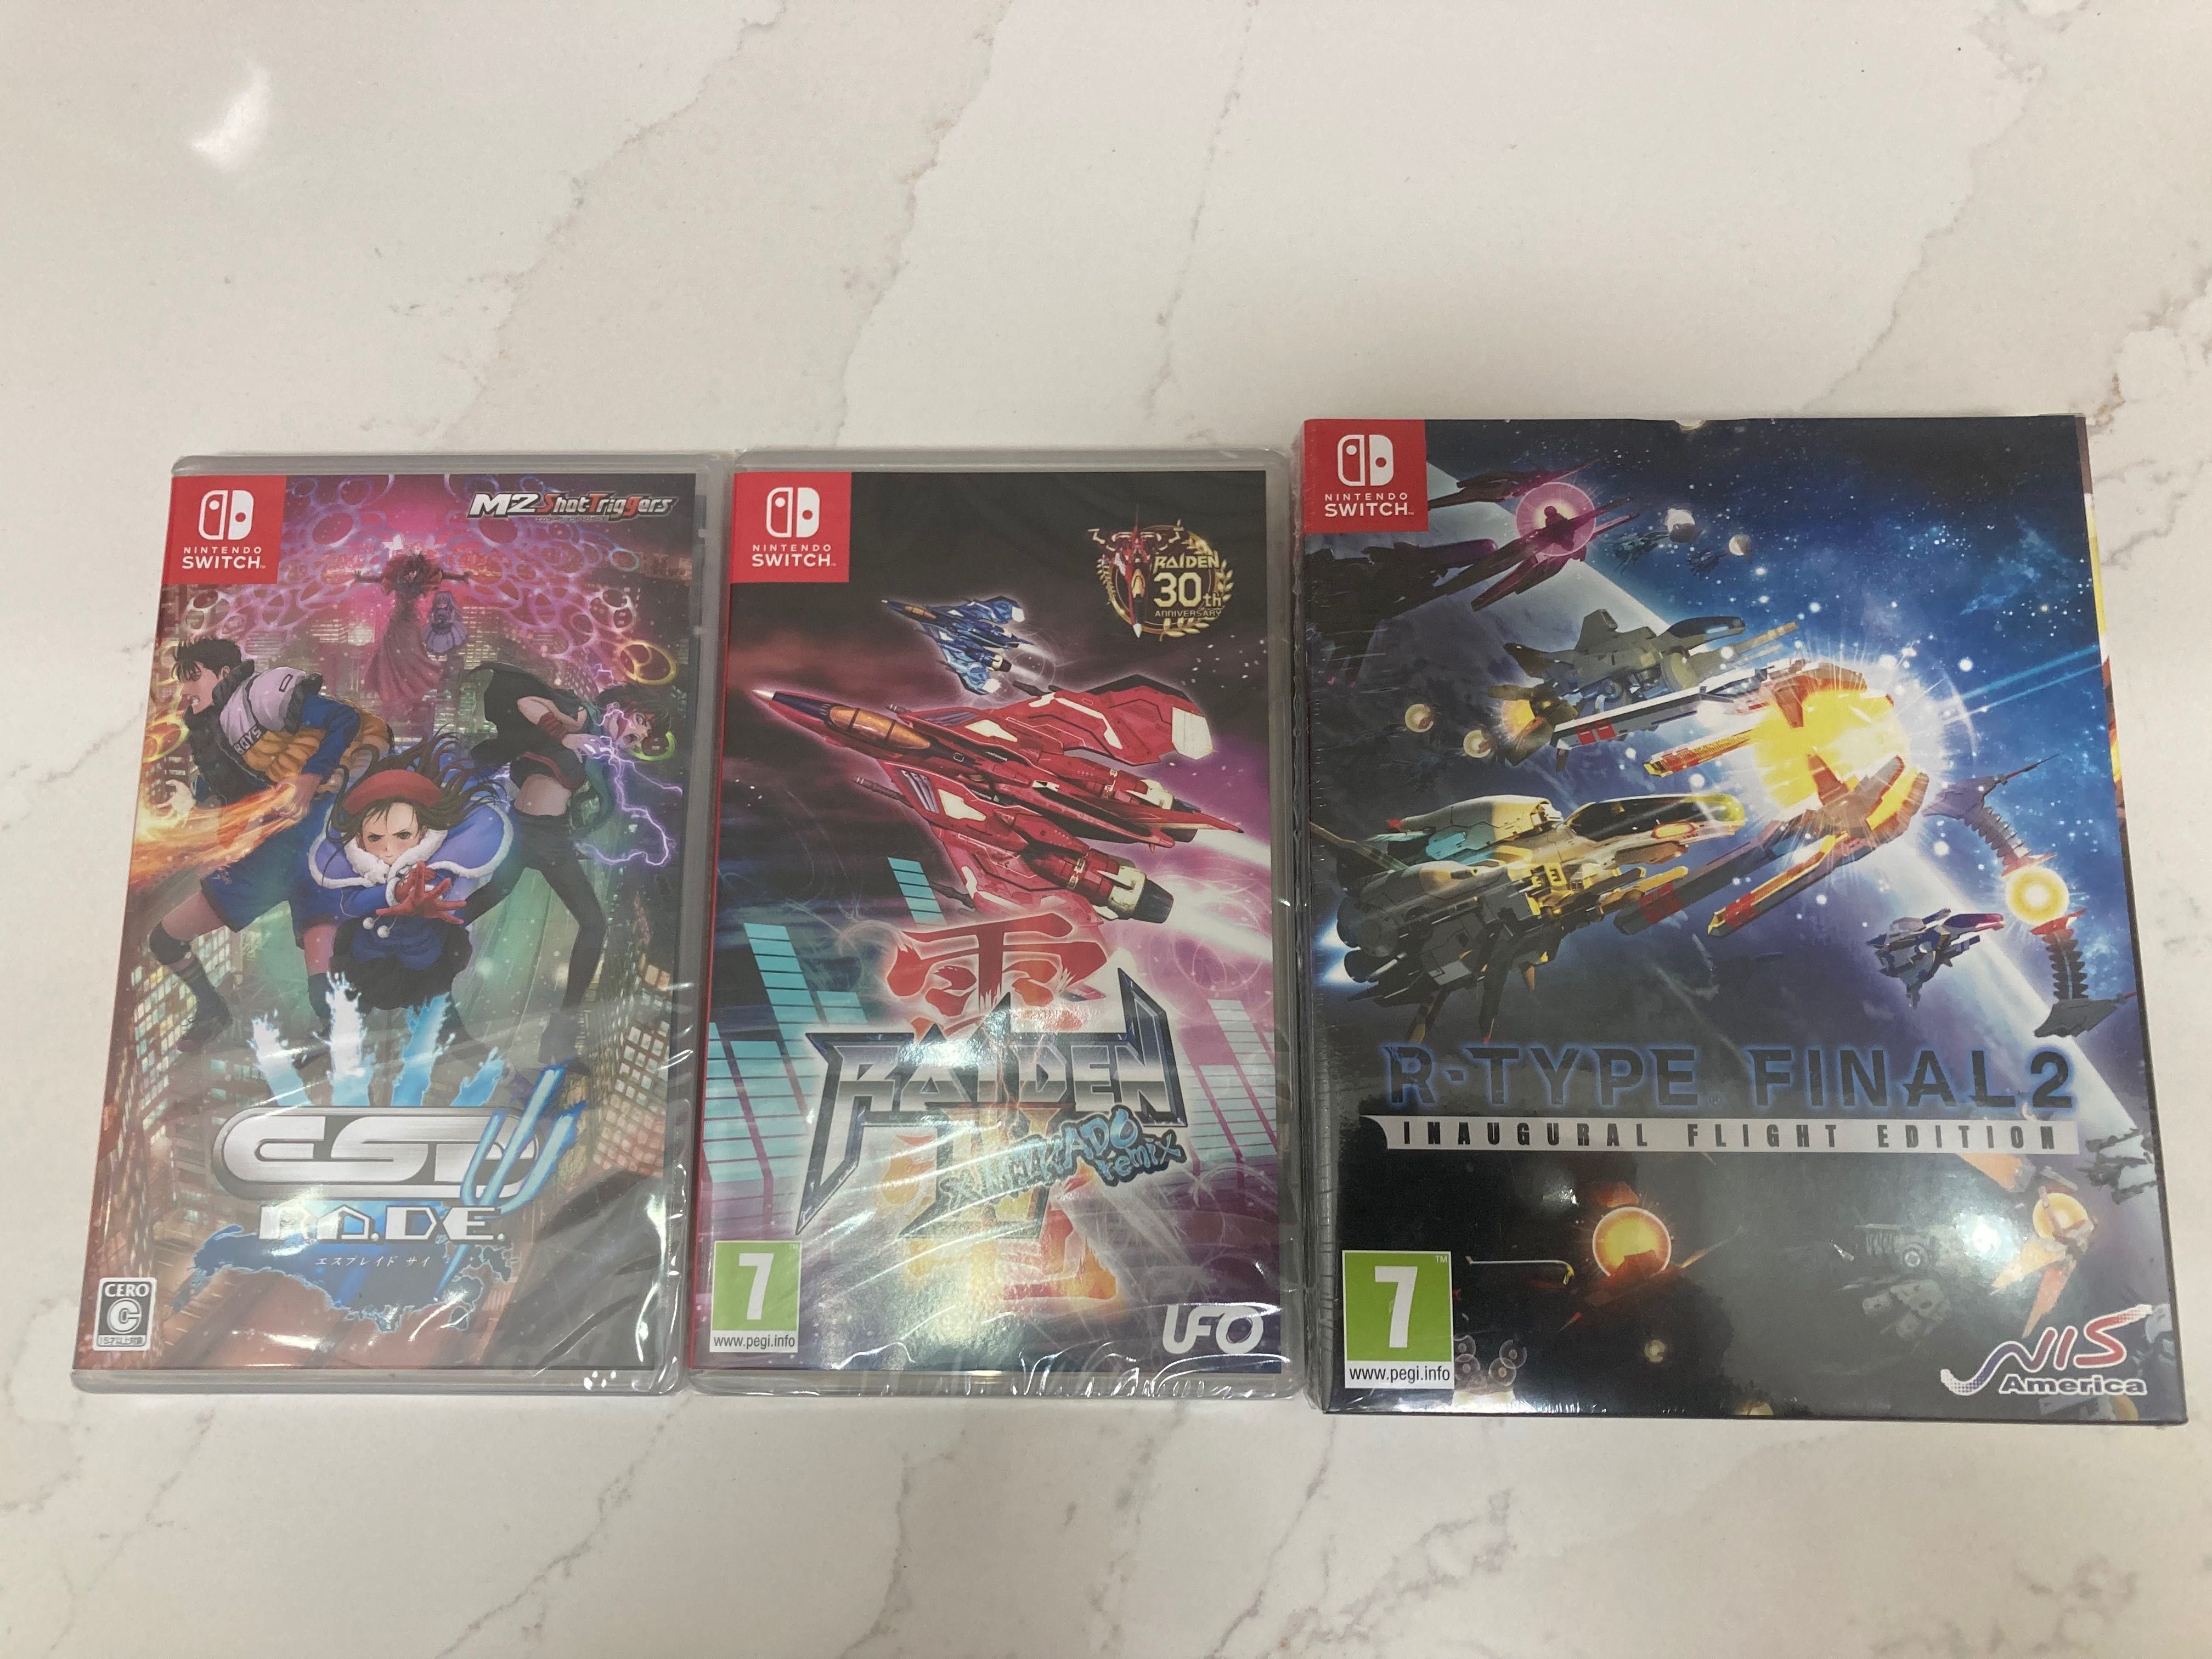 Shmups on Switch - New and sealed